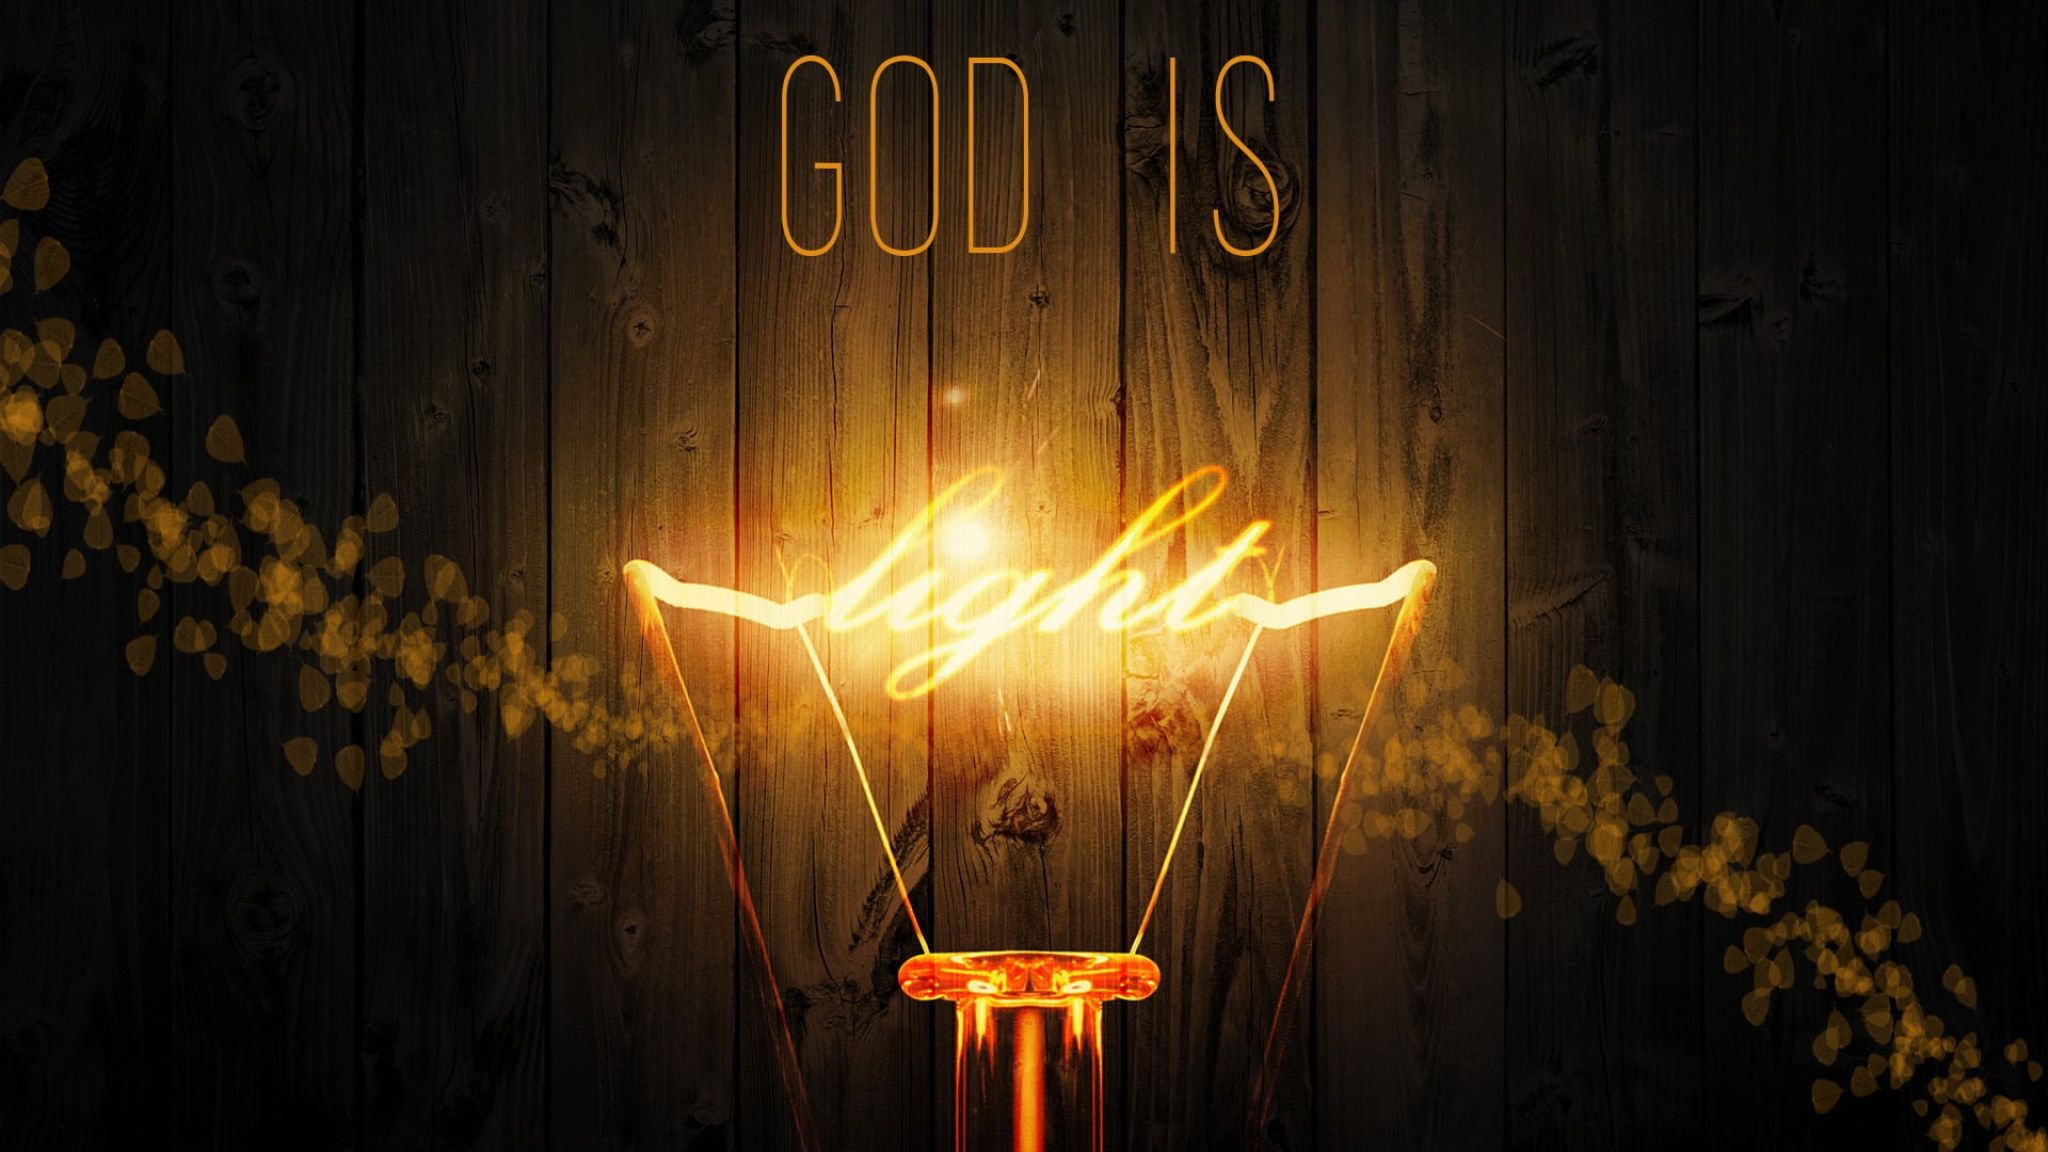 Quote Wallpaper • Wallpaper god is light quote, Jesus Christ, lights, illuminated, glowing • Wallpaper For You The Best Wallpaper For Desktop & Mobile